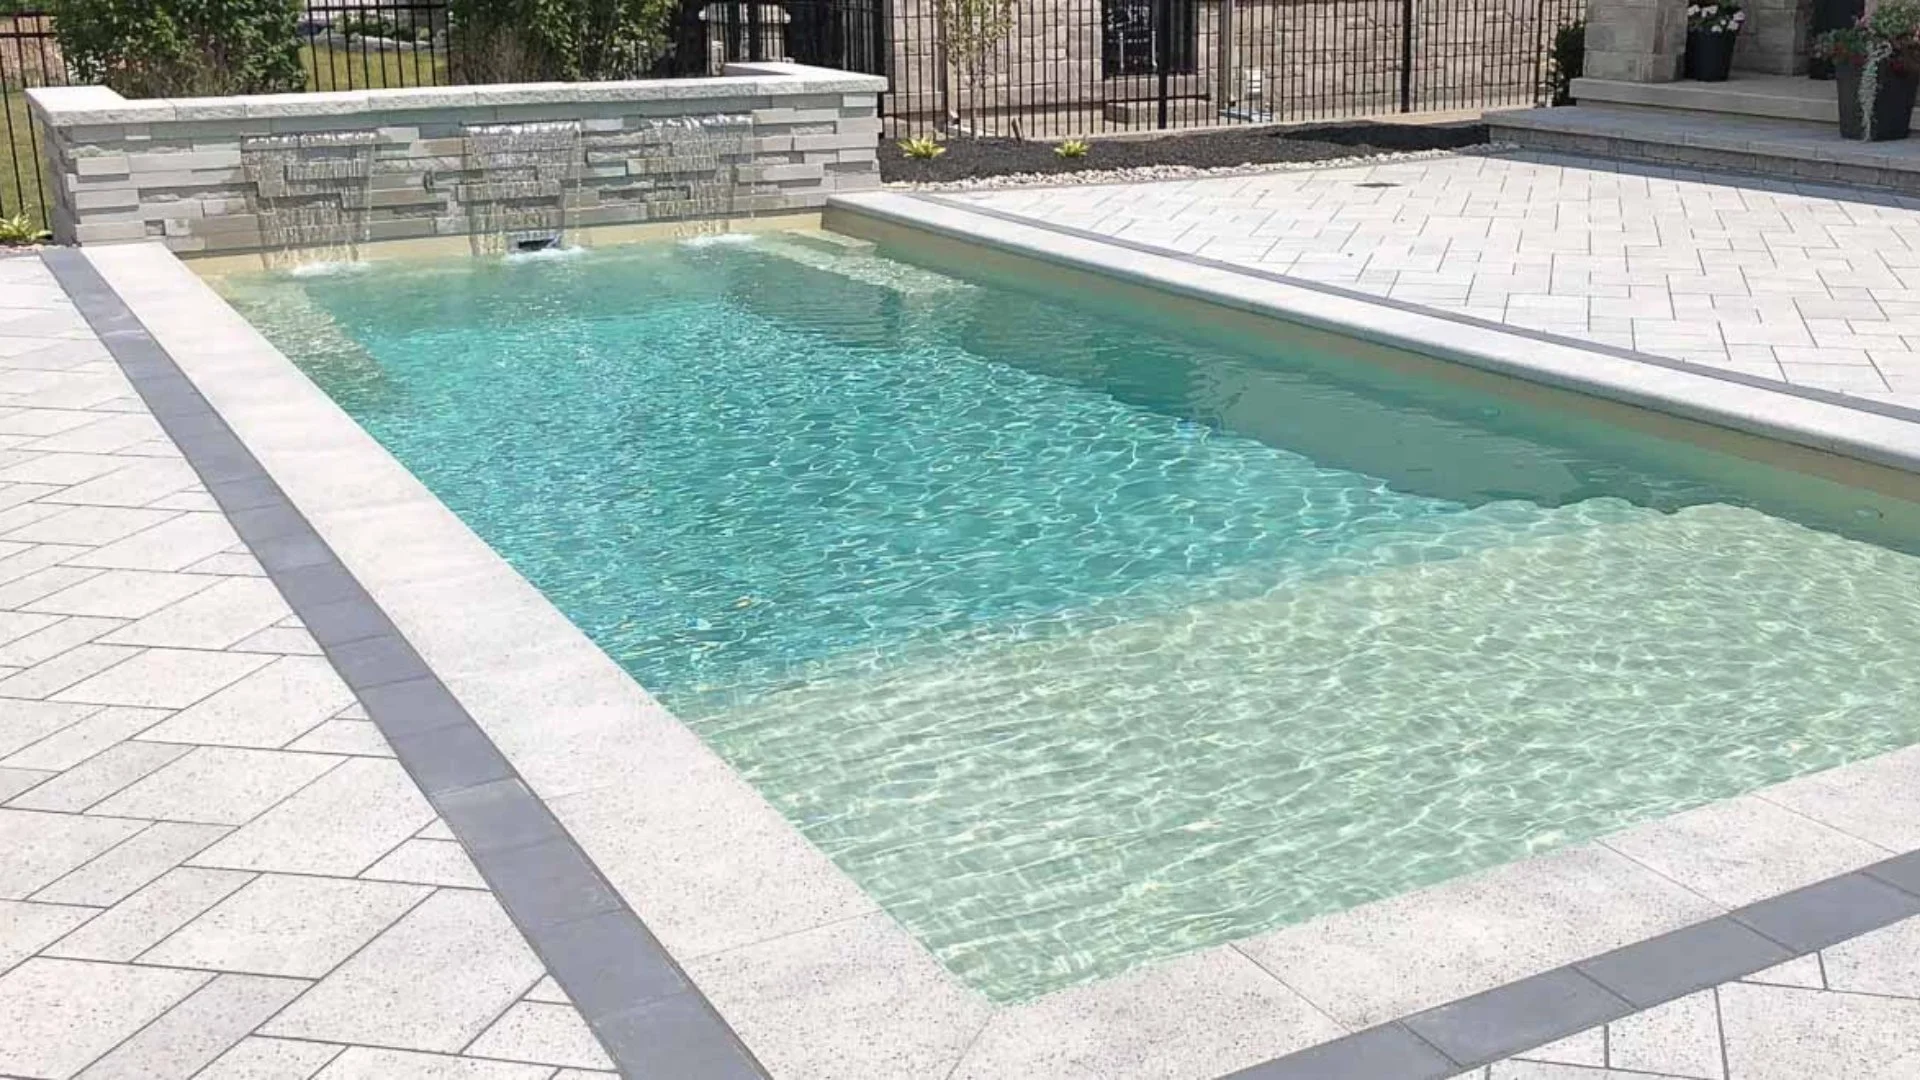 3 Things to Consider Before Installing a New Swimming Pool